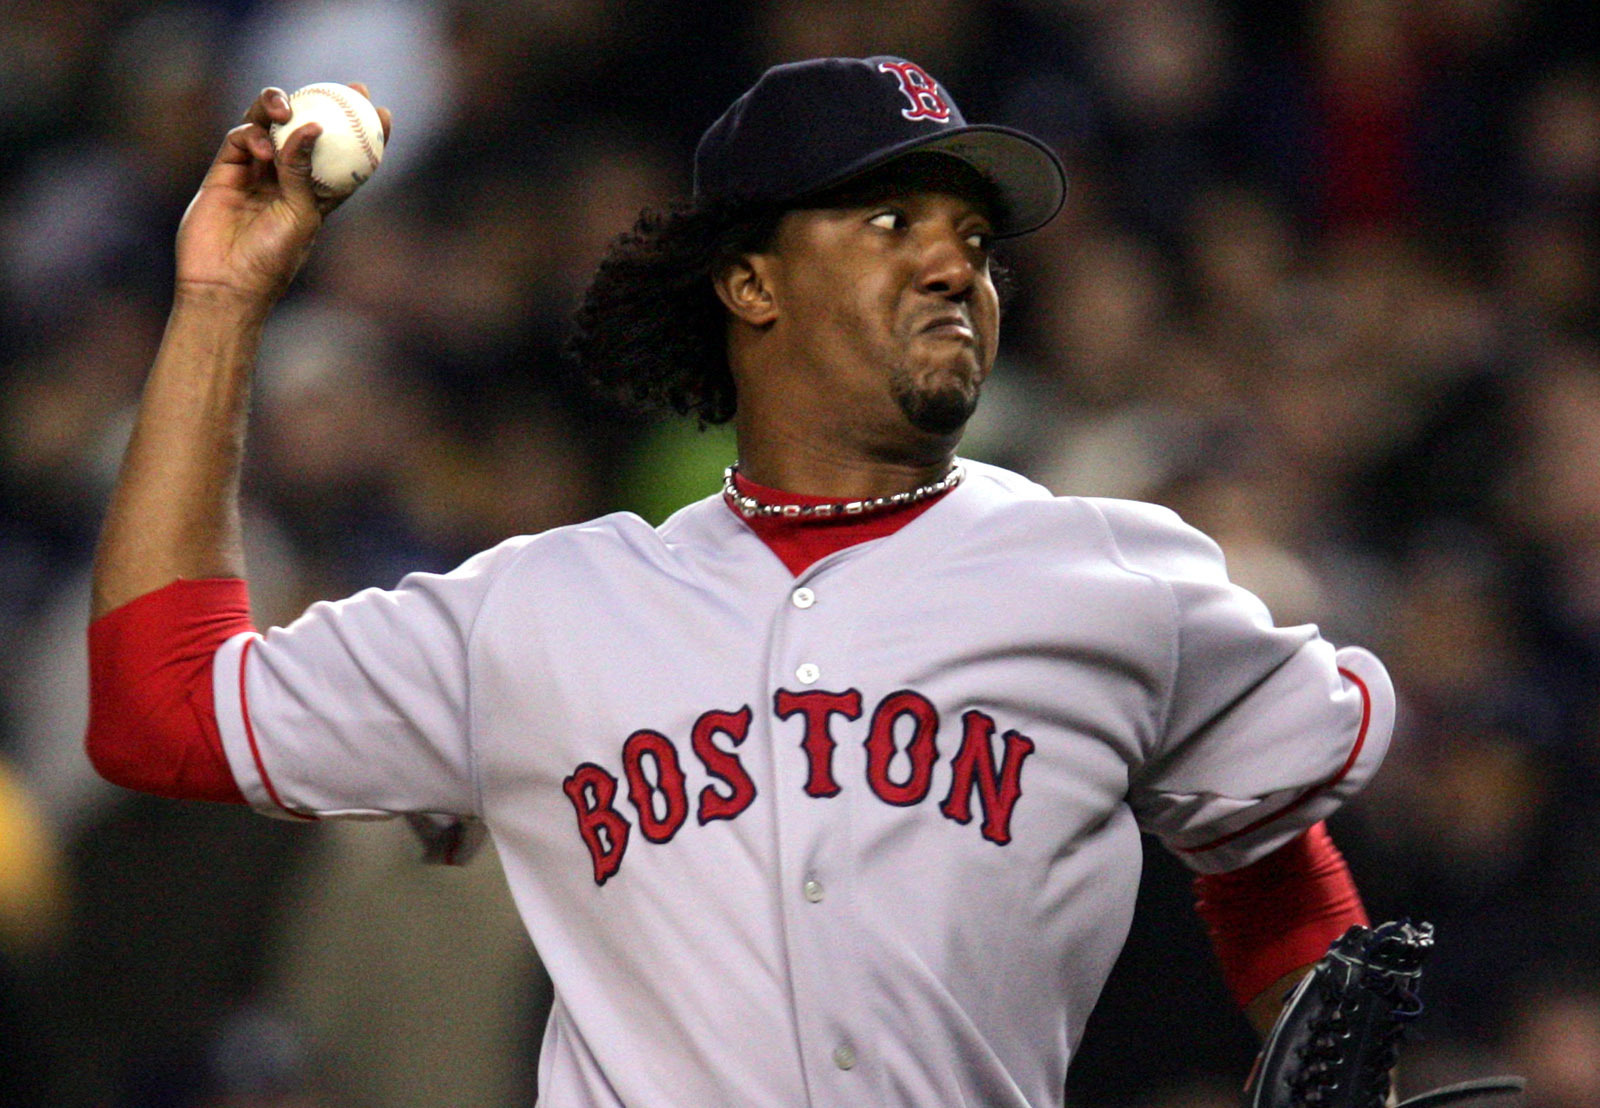 Best MLB Pitchers Of All-Time: Top 5 Baseball Legends, According